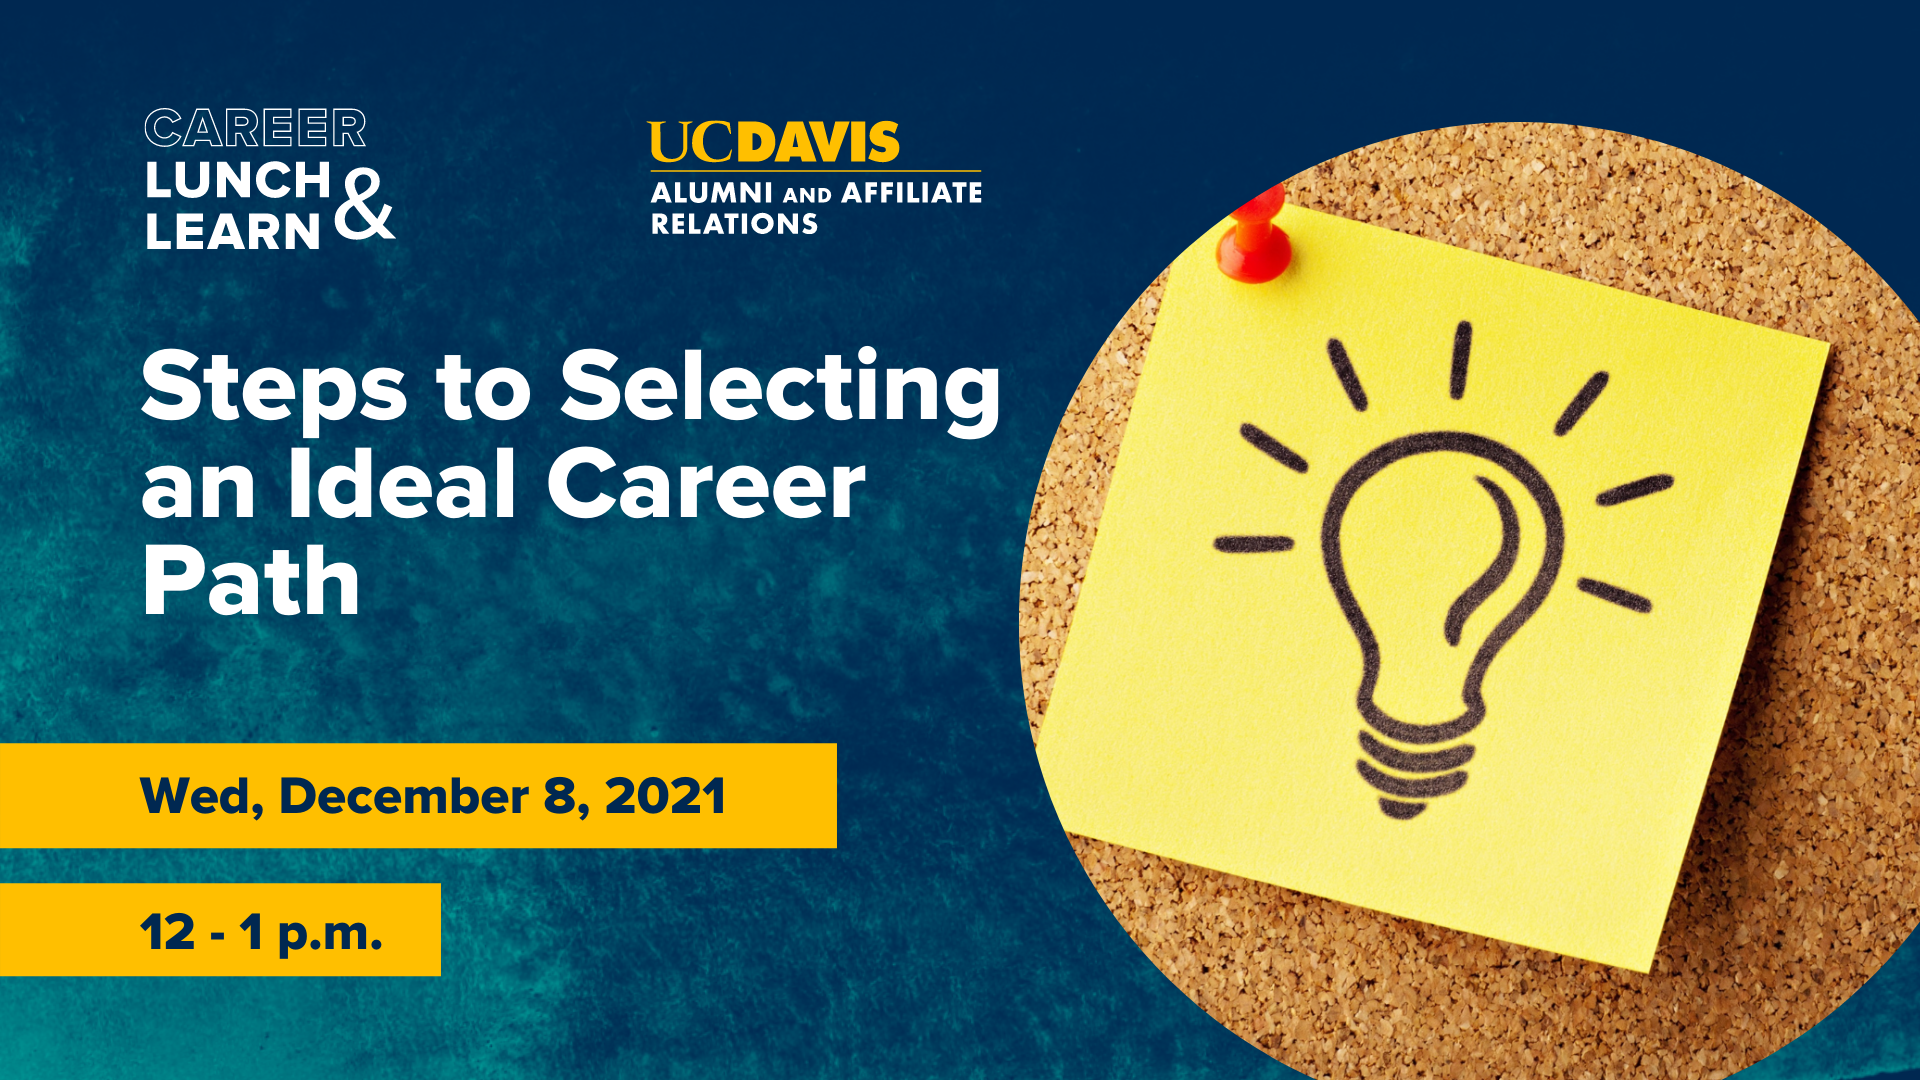 Image of lightbulb illustration on post-it note. Text reads: Career Lunch & Learn, UC Davis Alumni and Affiliate Relations, Steps to Selecting an Ideal Career Path, Wed., December 8, 2021, 12-1 p.m.